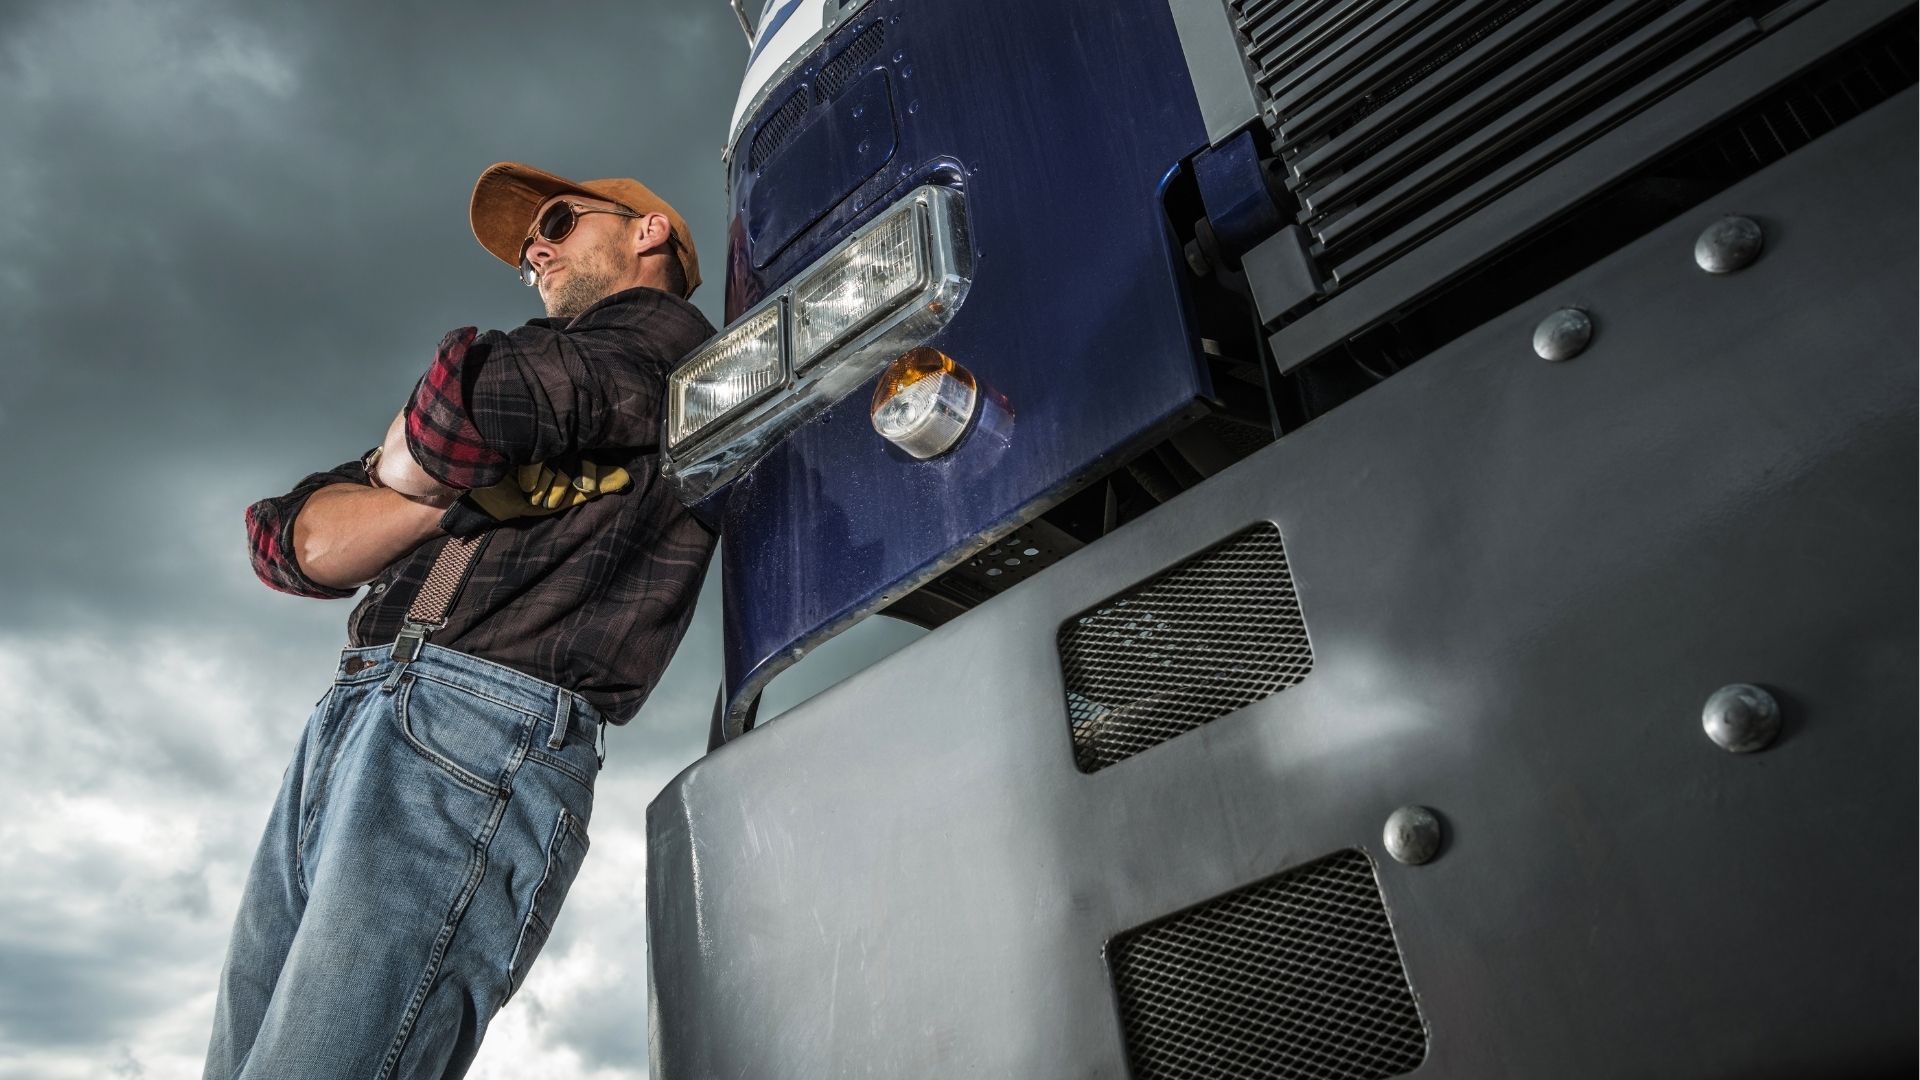 Commercial Vehicle Accidents: What Are the Employer’s Responsibilities?